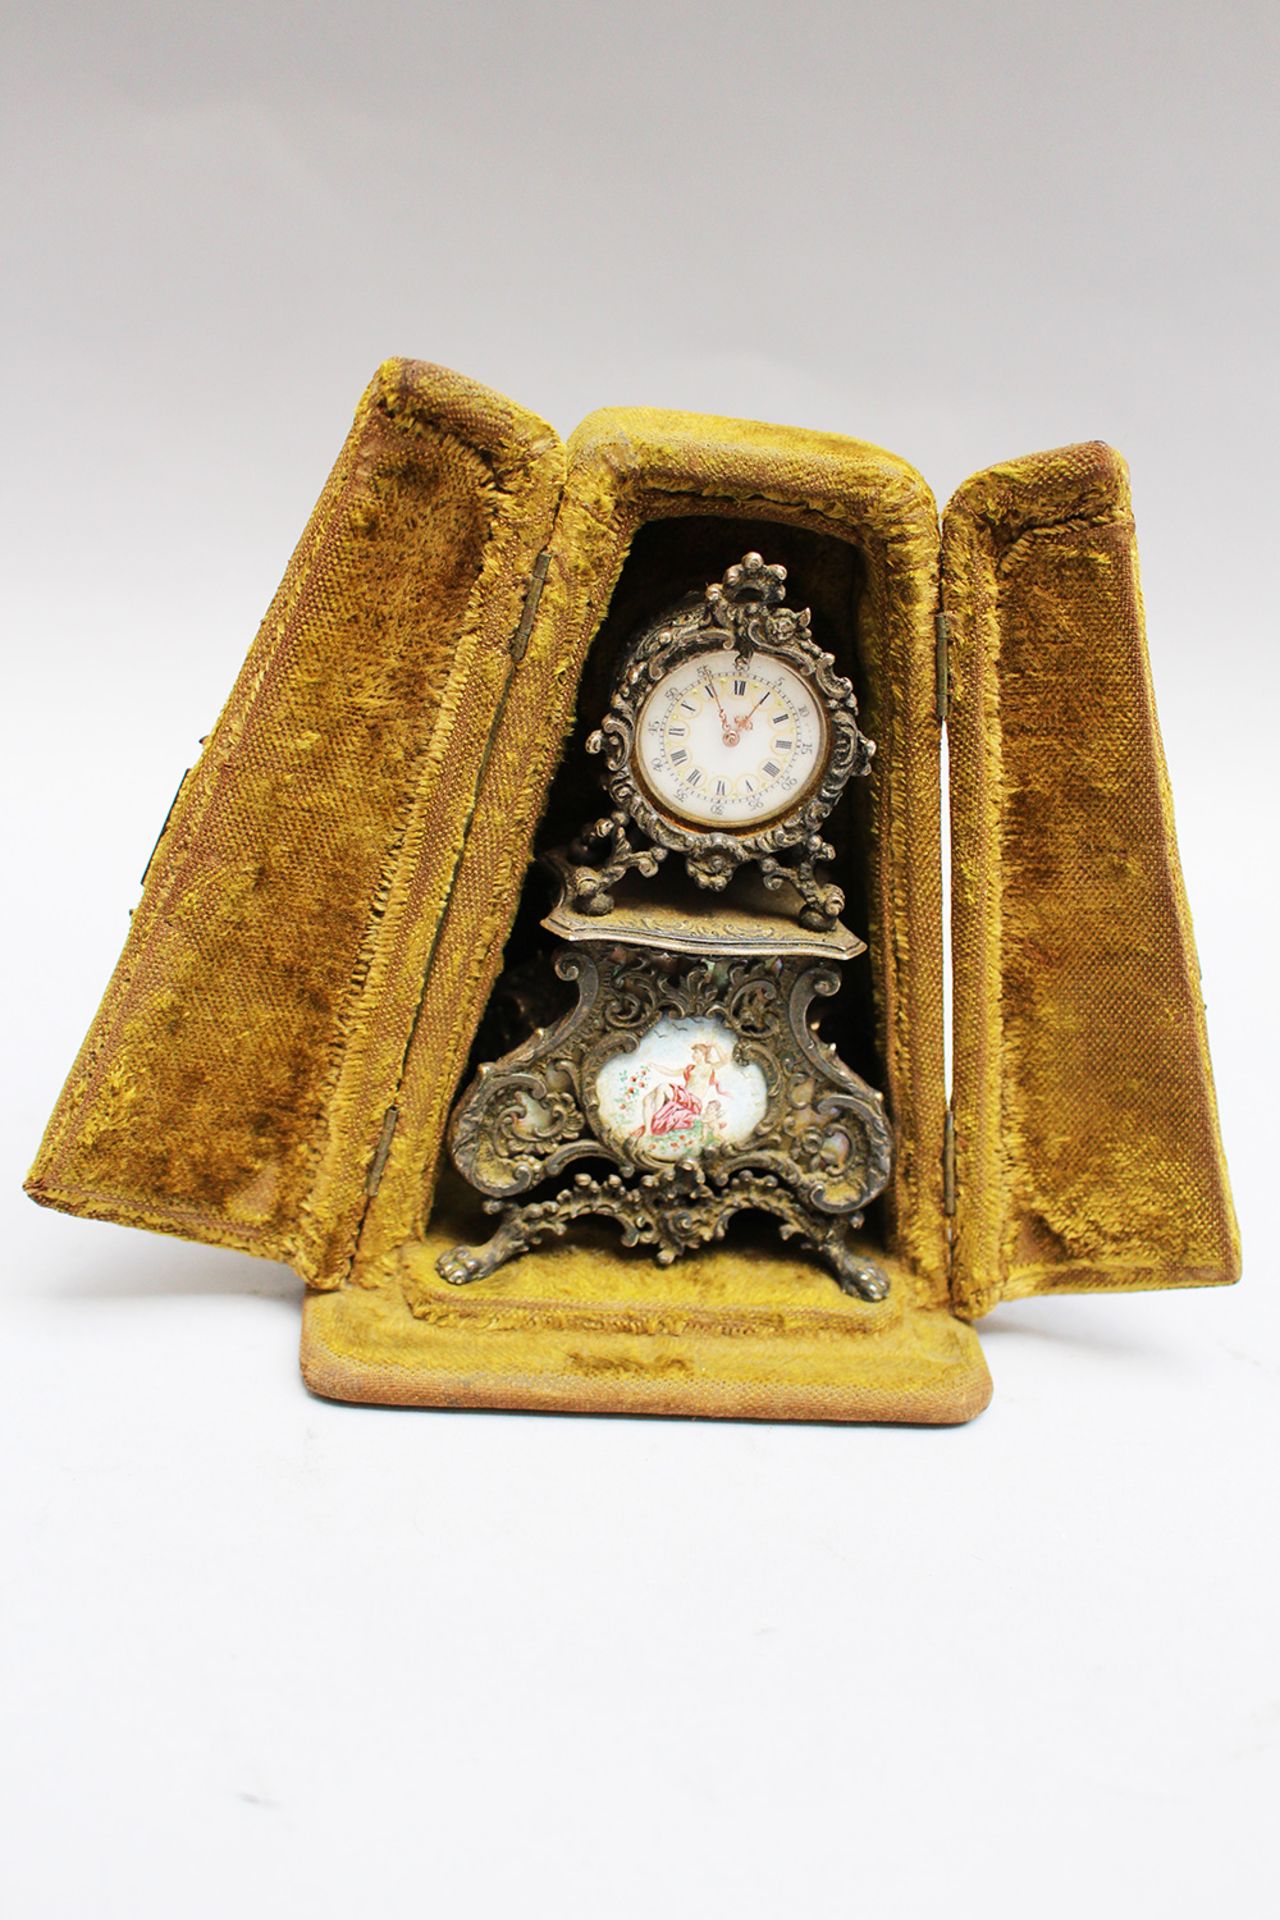 Silver miniature clock, in baroque from , inside gilted, with enamel dial and painting, open - Image 3 of 3